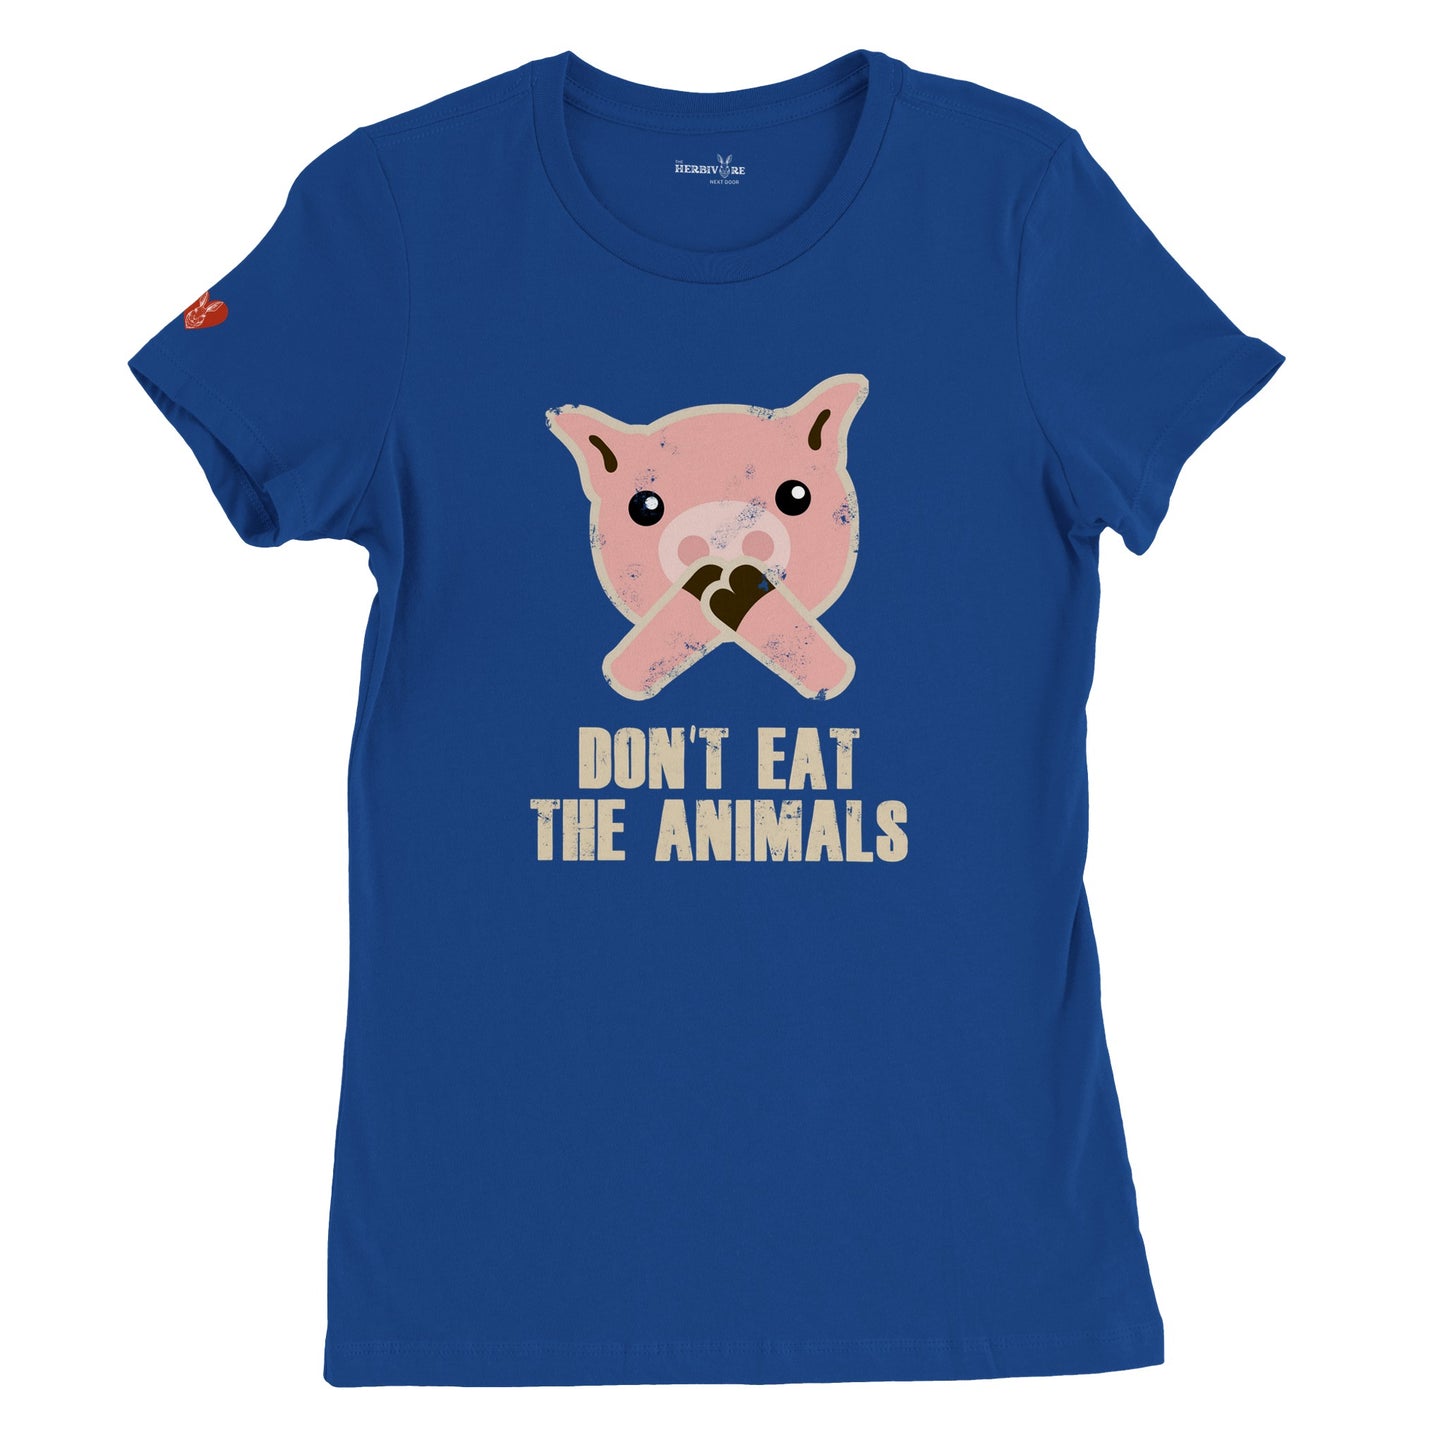 Don't Eat the Animals - Women's Style